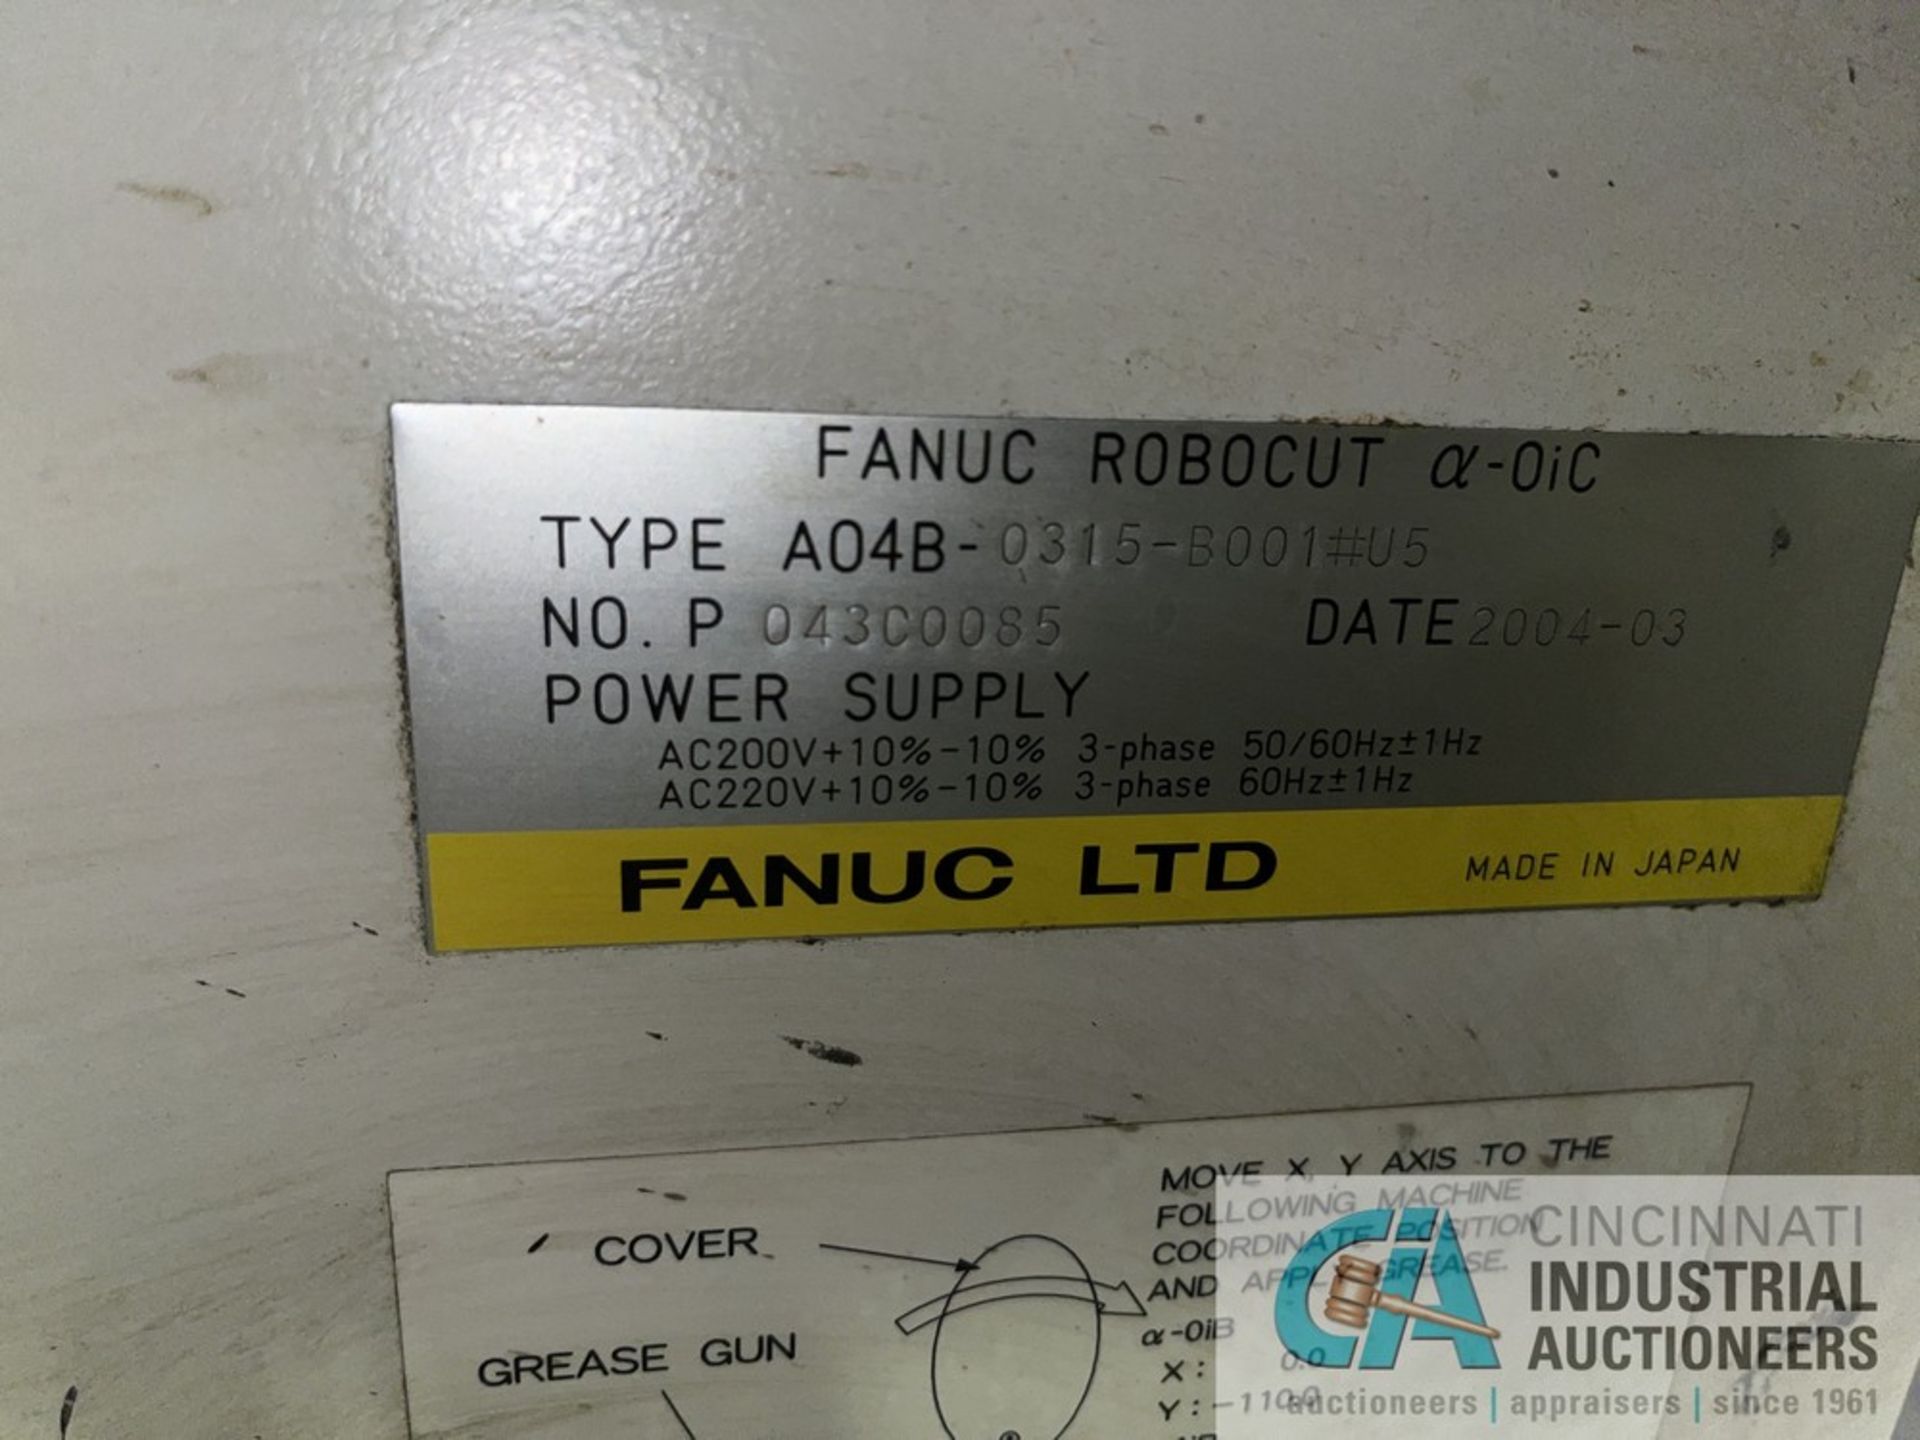 FANUC MODEL ROBOCUT A-OiC CNC WIRE EDM; S/N 043C0085 (NEW 2004), TABLE AREA 21" X 14", X-AXIS 12.5", - Image 11 of 11